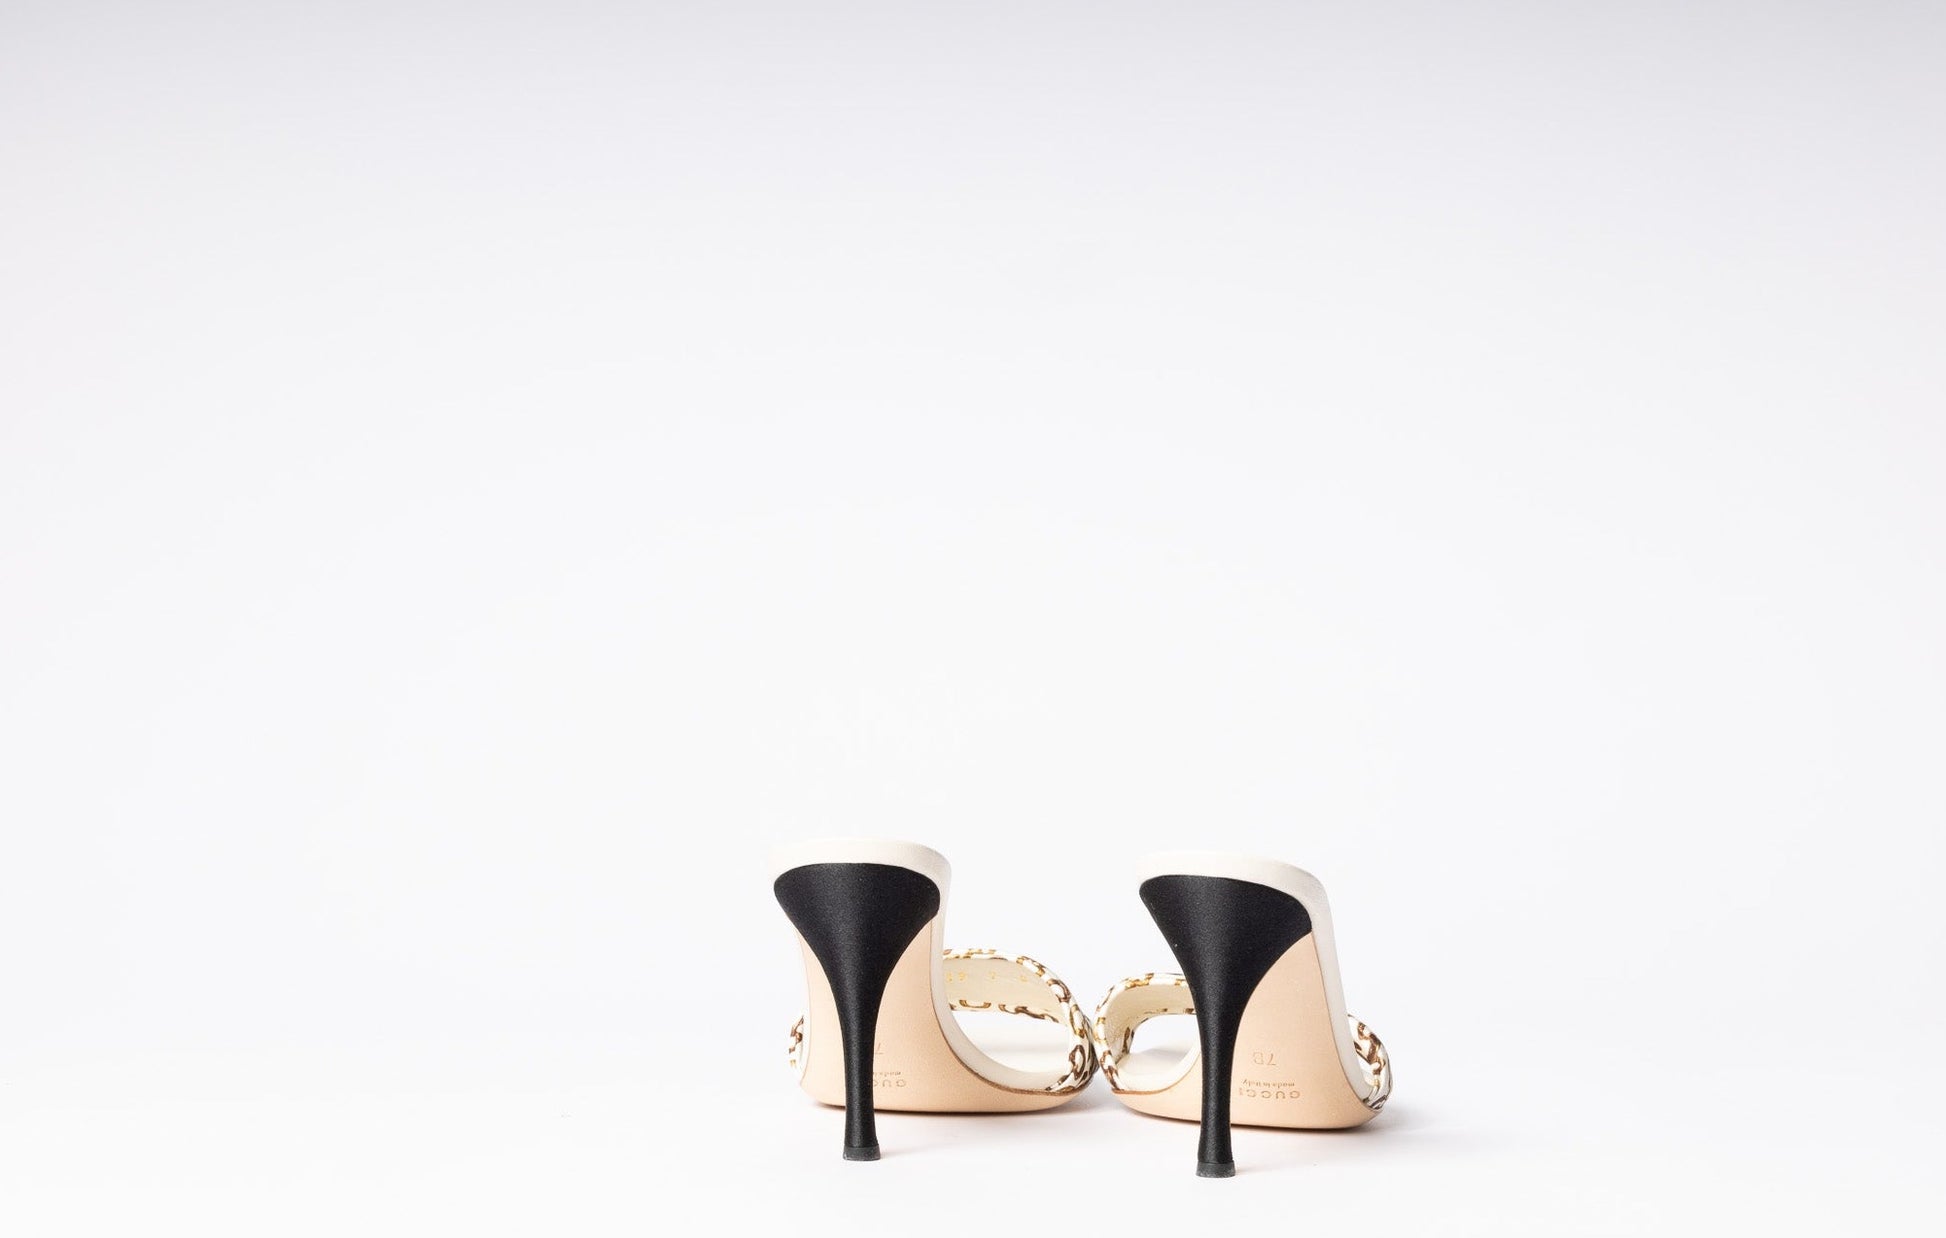 Vintage Gucci Heels - Timeless glamour and iconic style for a sophisticated fashion statement